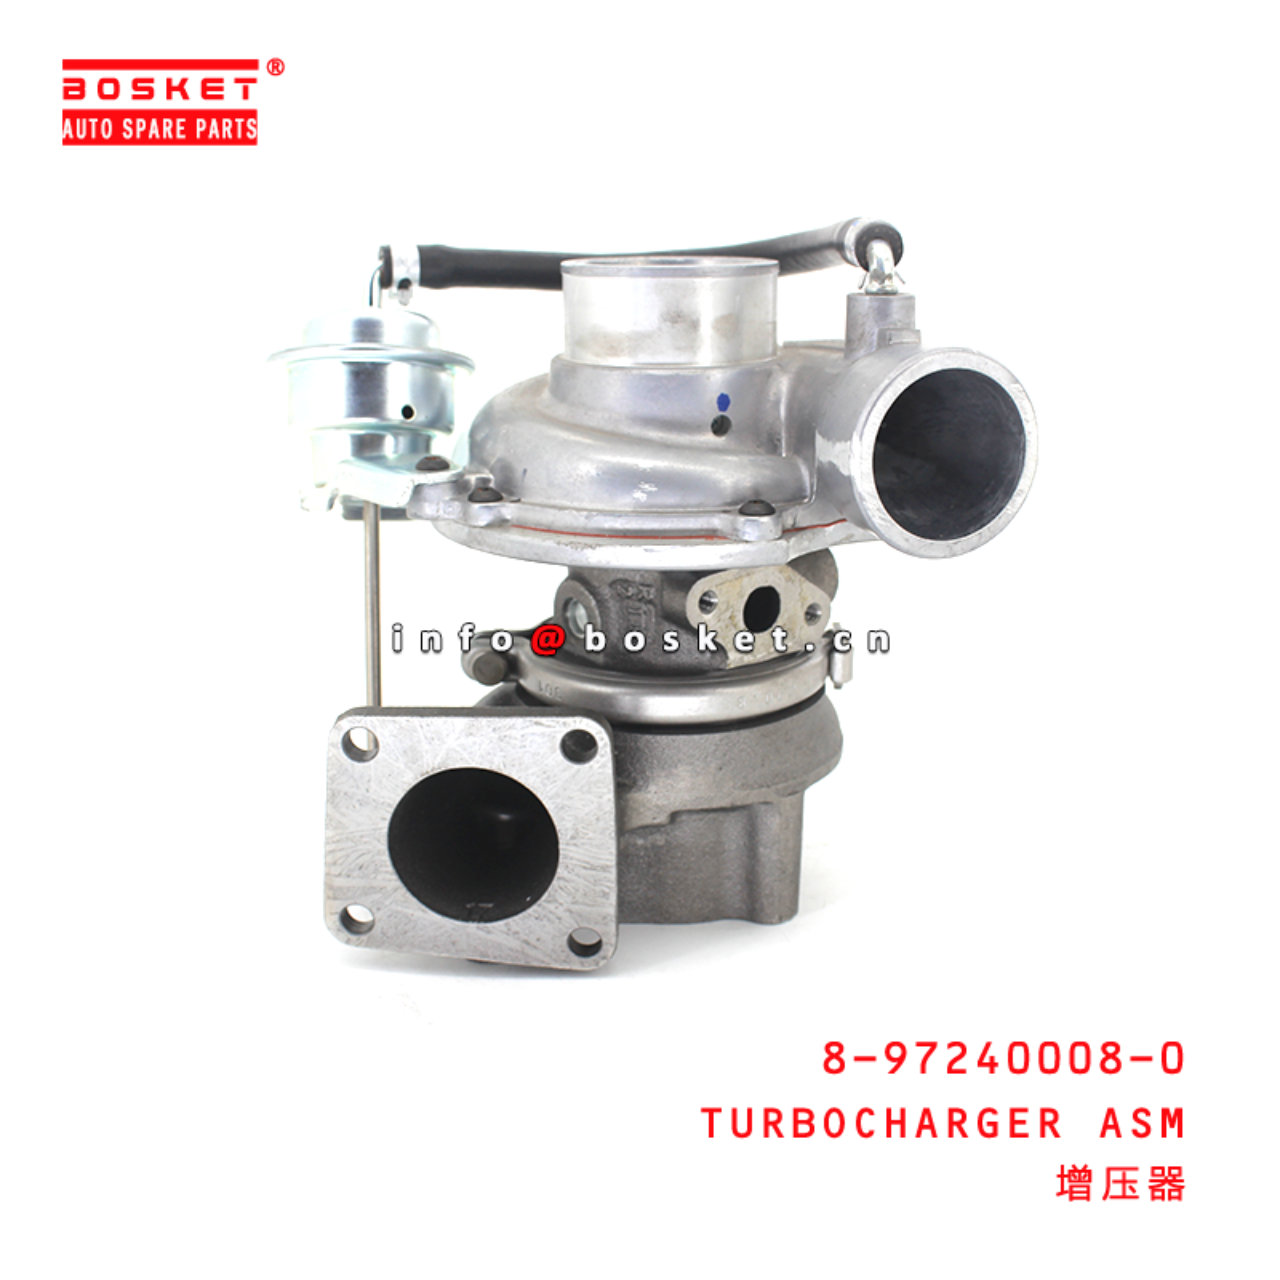 8-97240008-0 Turbocharger Assembly suitable for ISUZU NKR77 P600 8972400080